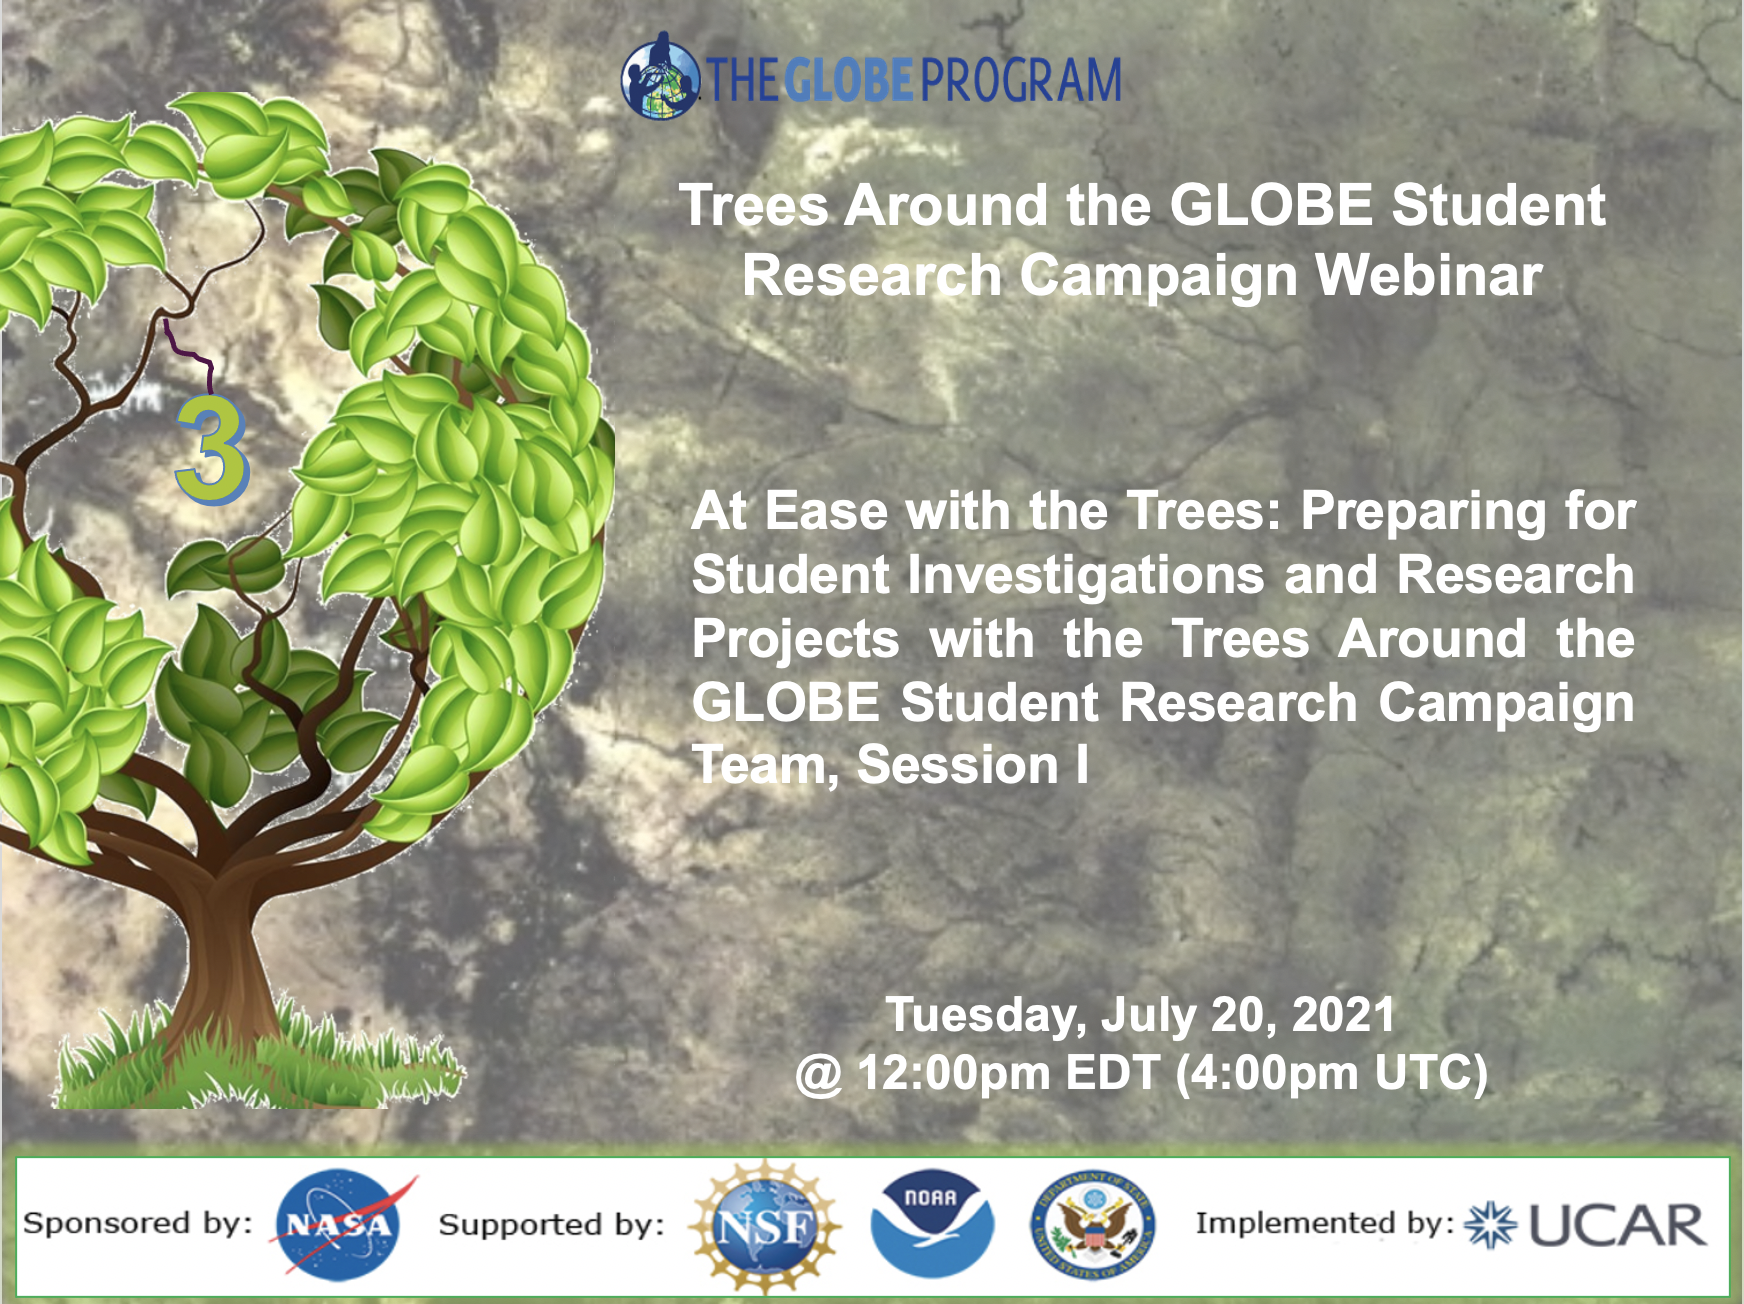 Trees Around the GLOBE 20 July webinar shareable, with a tree in the background and a satellite photo of the Earth